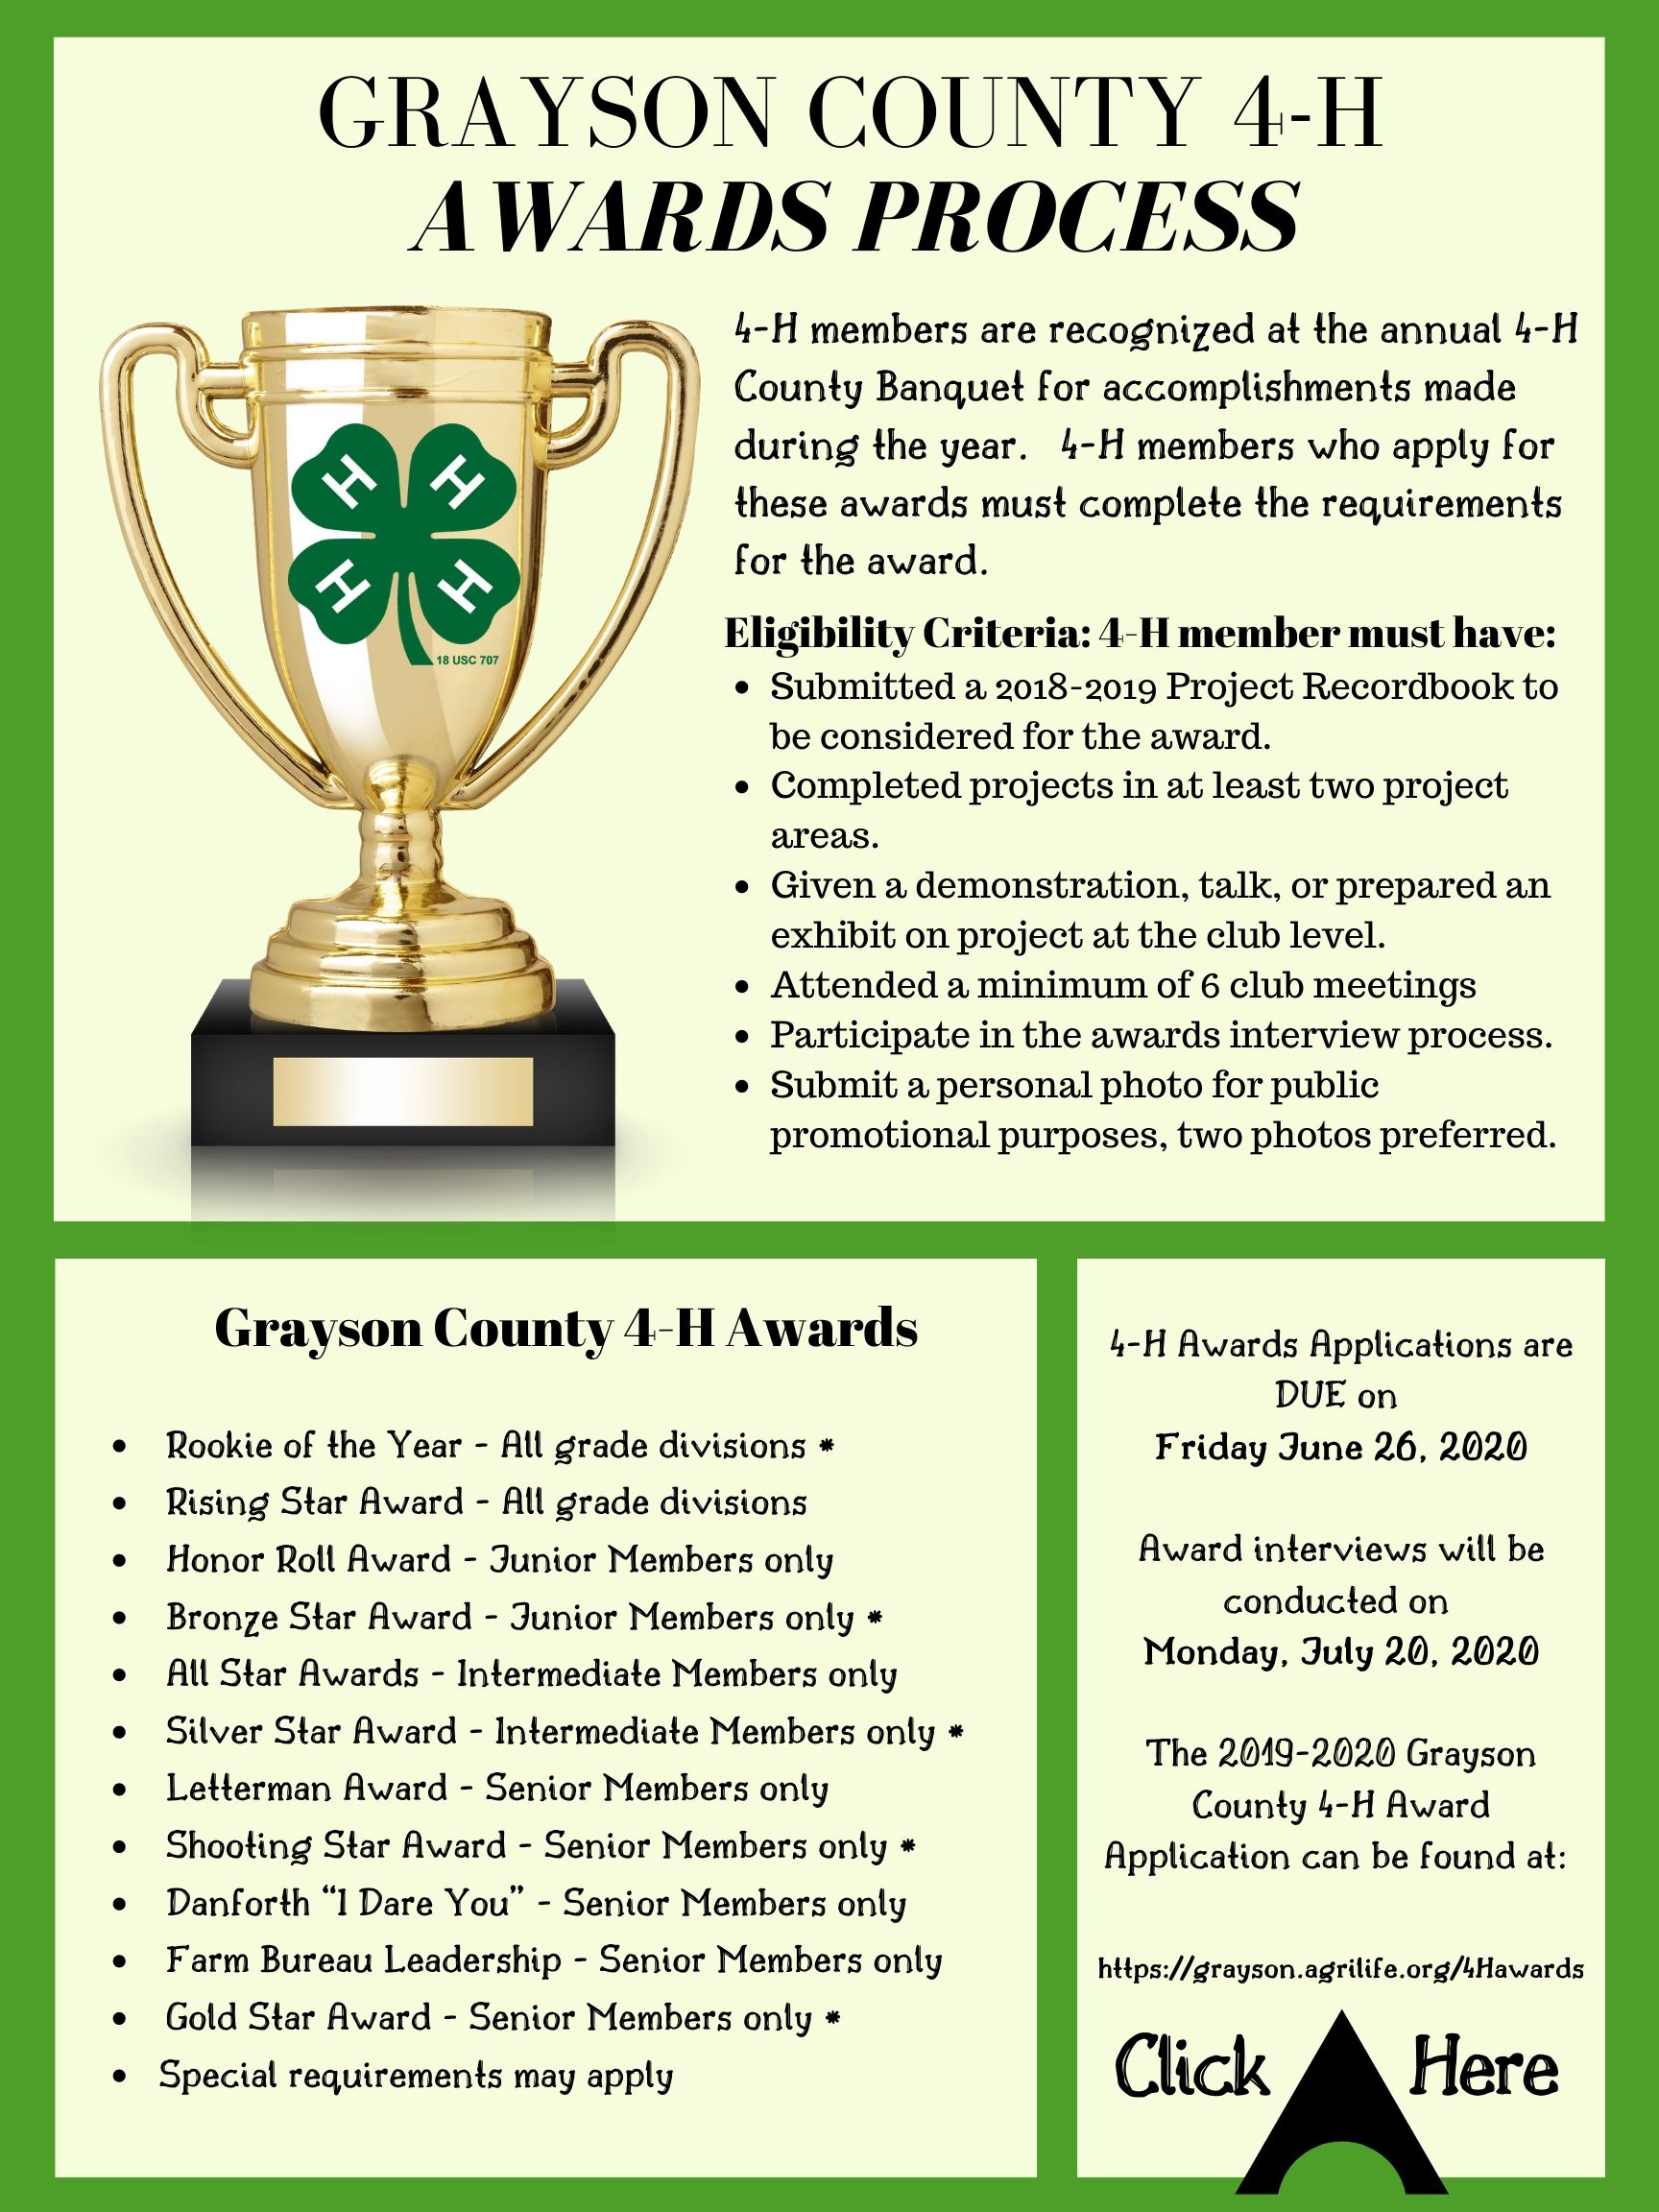 4-H Awards and Applications | Grayson